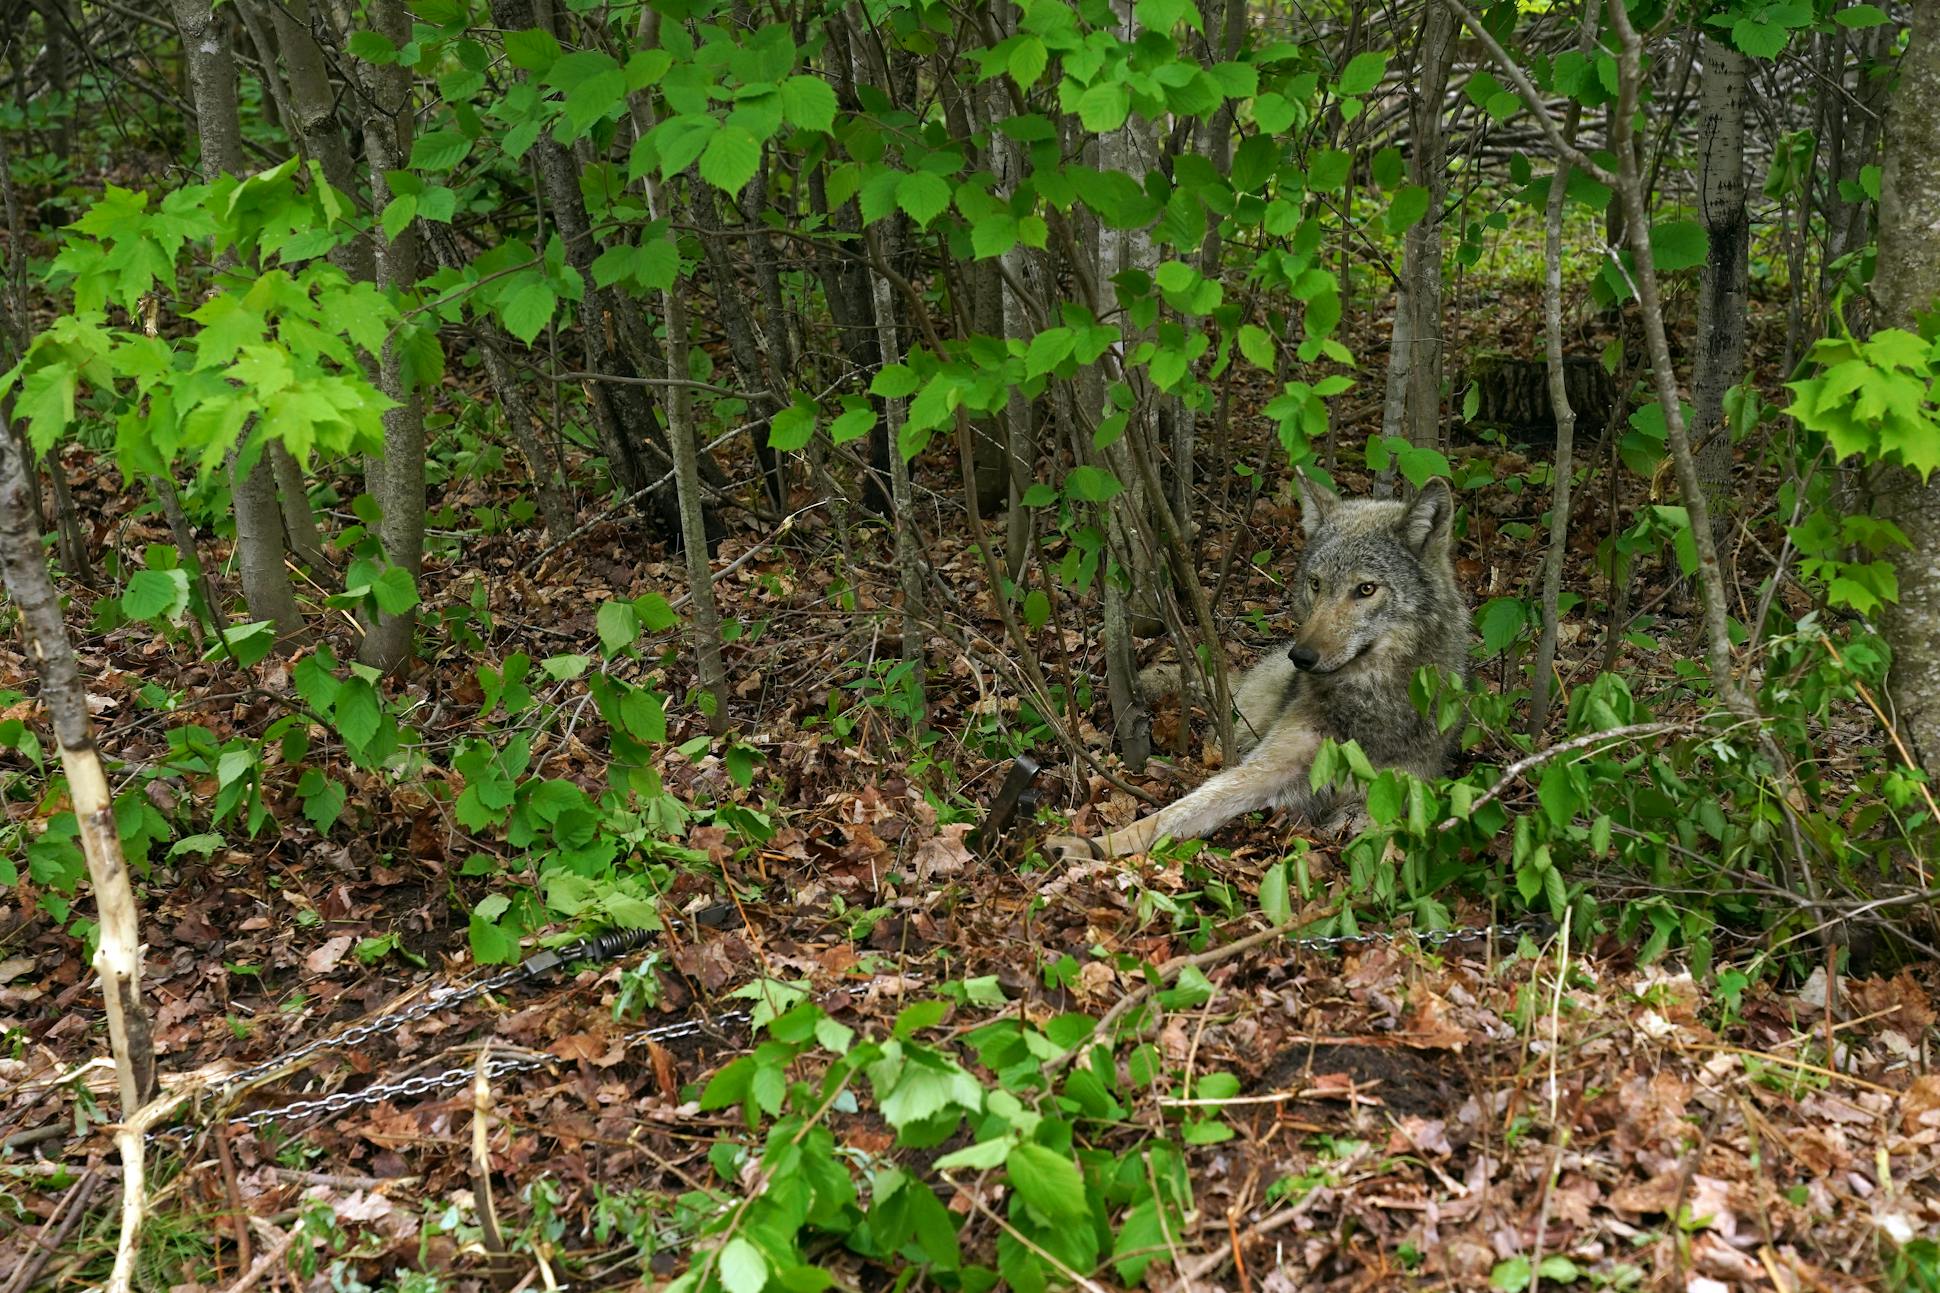 O1T edged as far as possible into the brush as researchers approached the gray wolf, caught in a padded research foot trap, to sedate him and put a GPS collar on him.